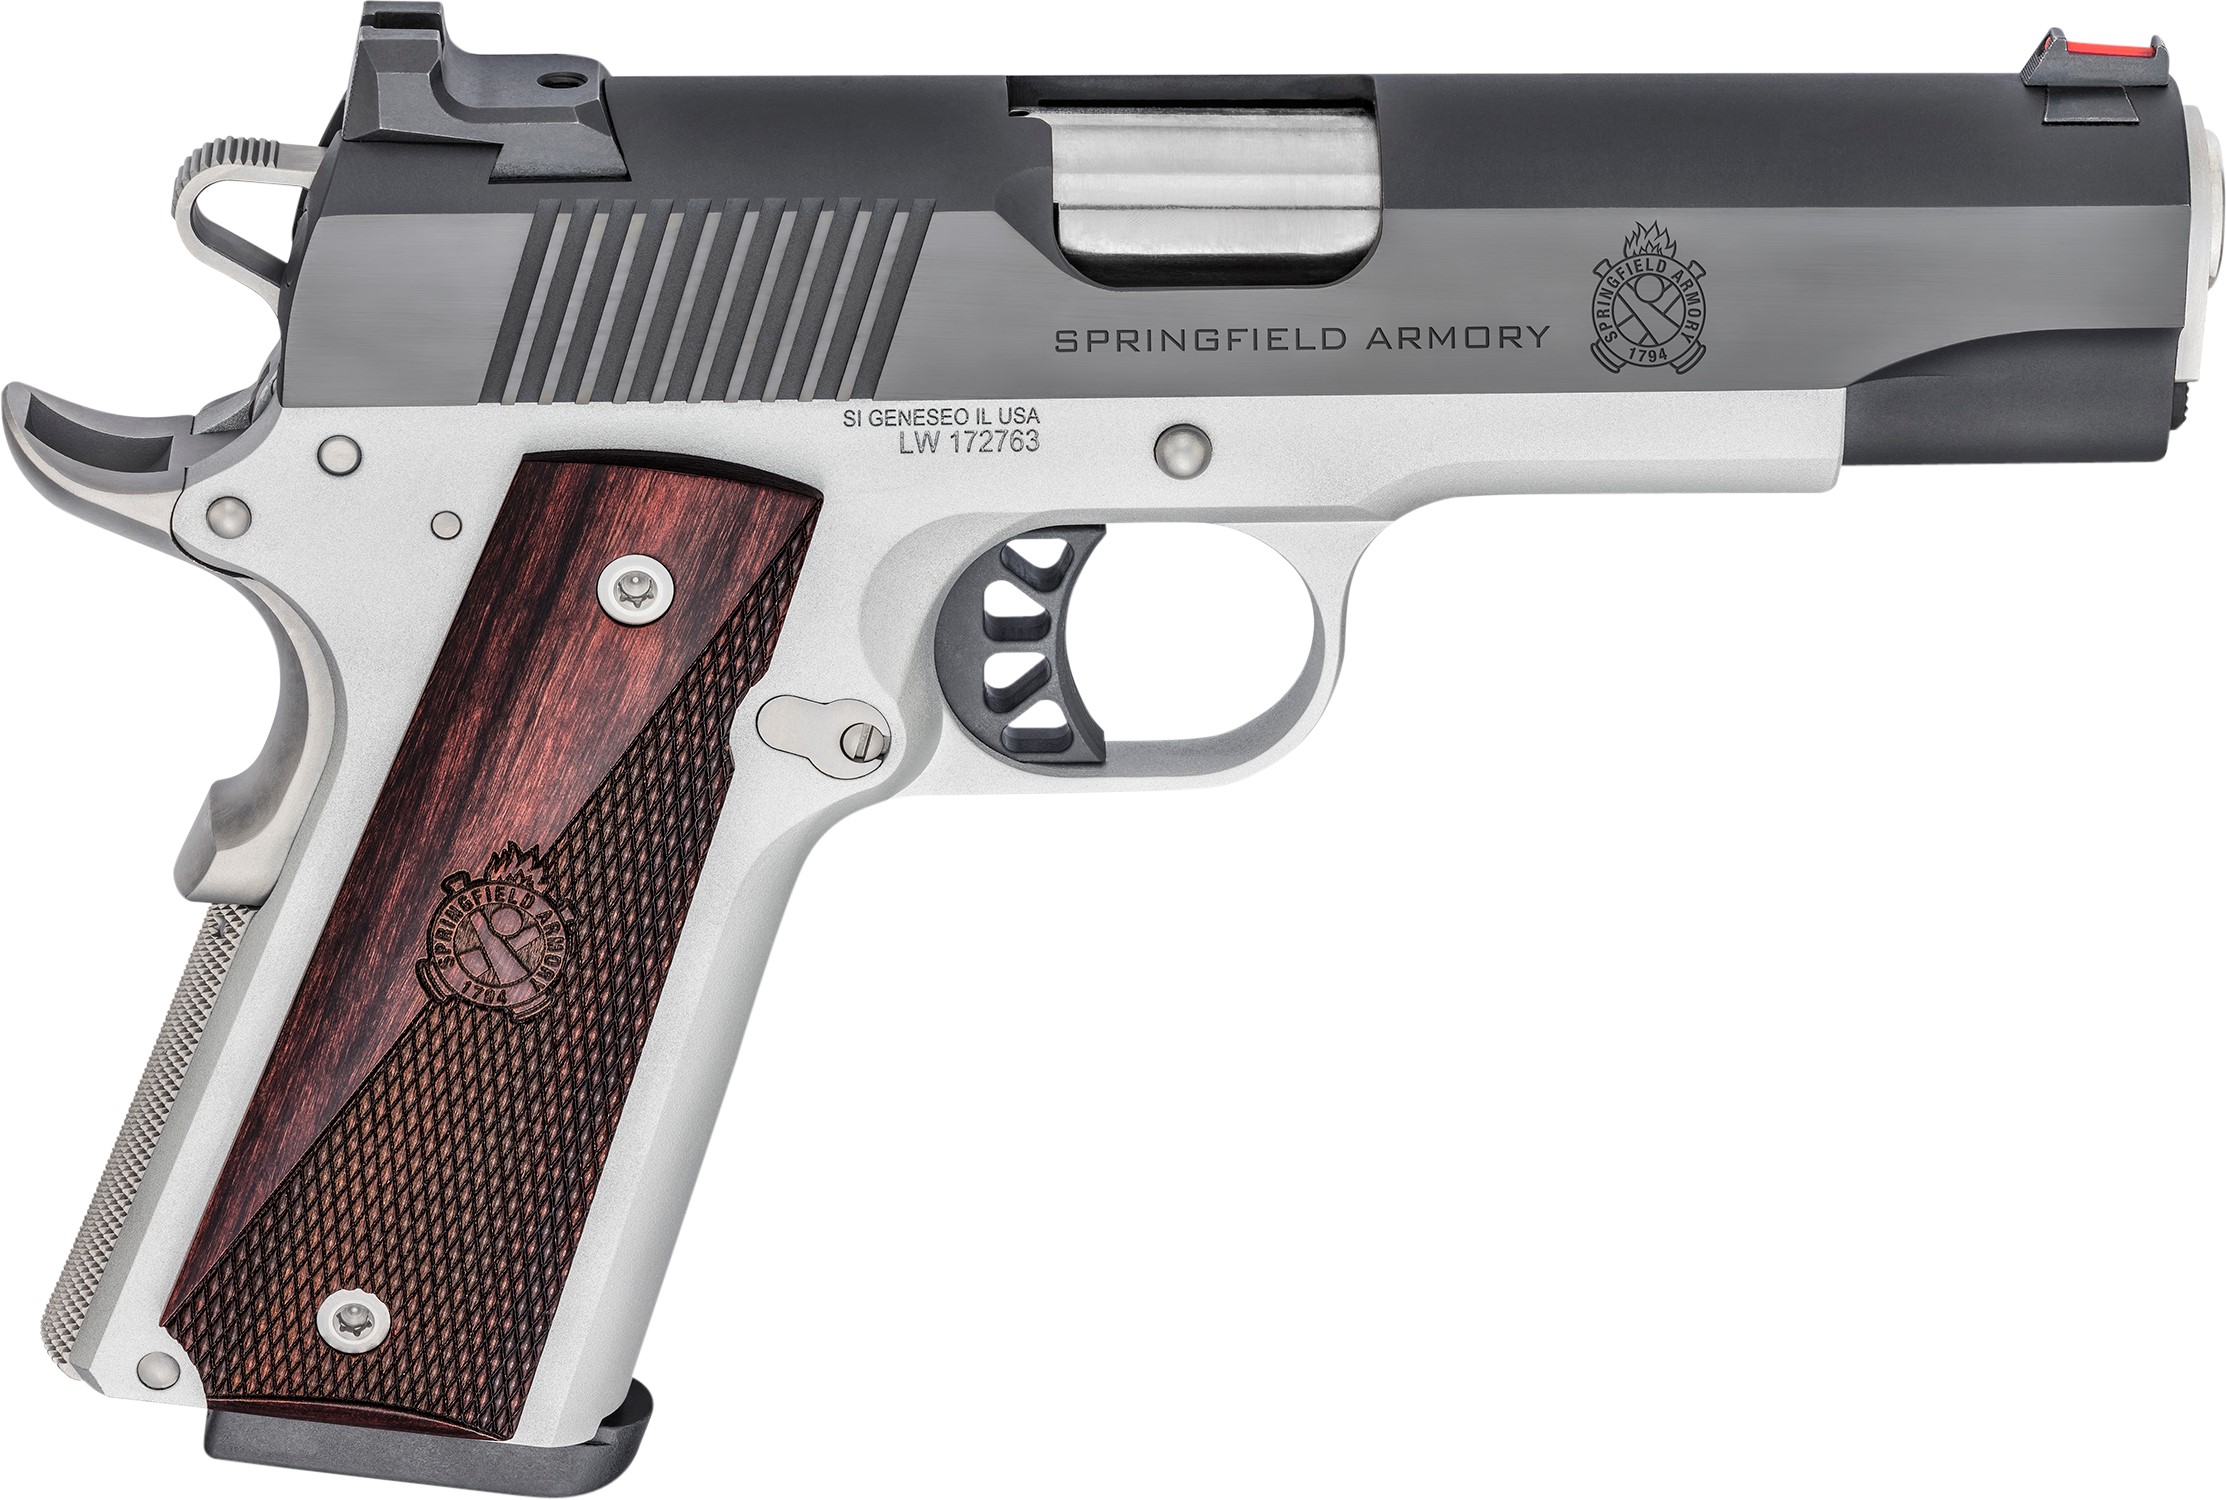 SPRINGFIELD ARMORY 1911 9MM RONIN 4.25" TWO TONE, 8 ROUNDS